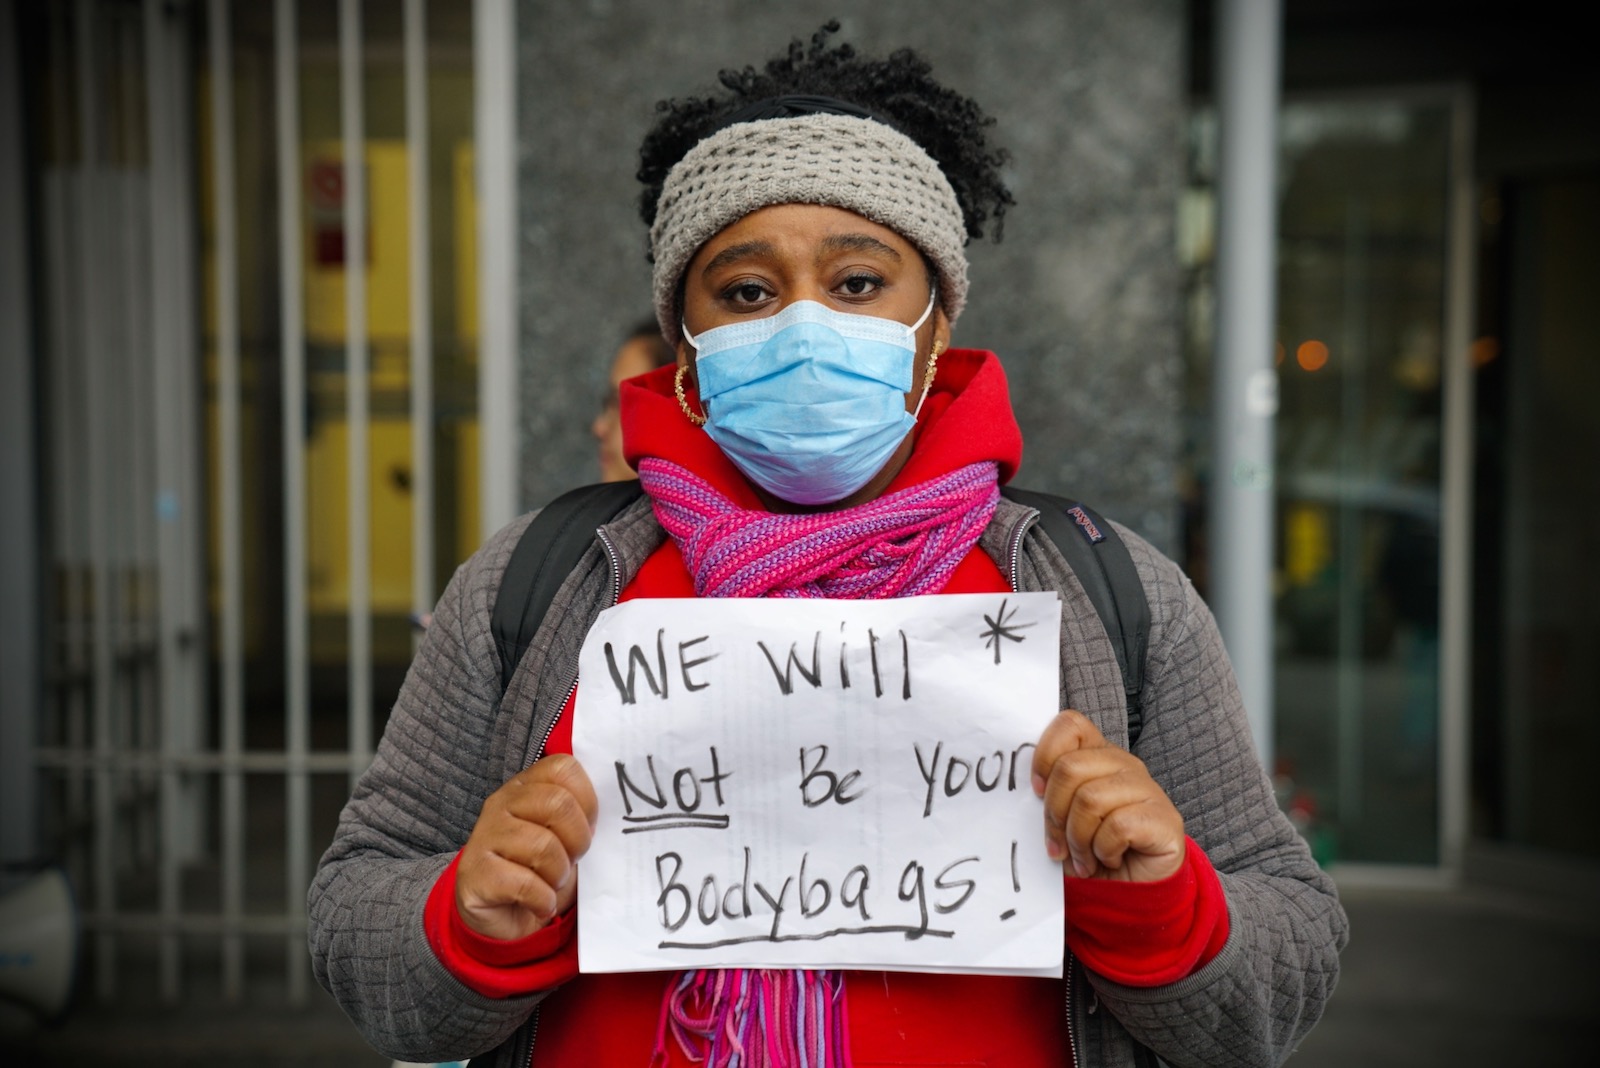 A protester demanding safer working conditions and better protective equipment at a “Covid-19 Frontline Health Worker Action” event, New York City, April 6, 2020